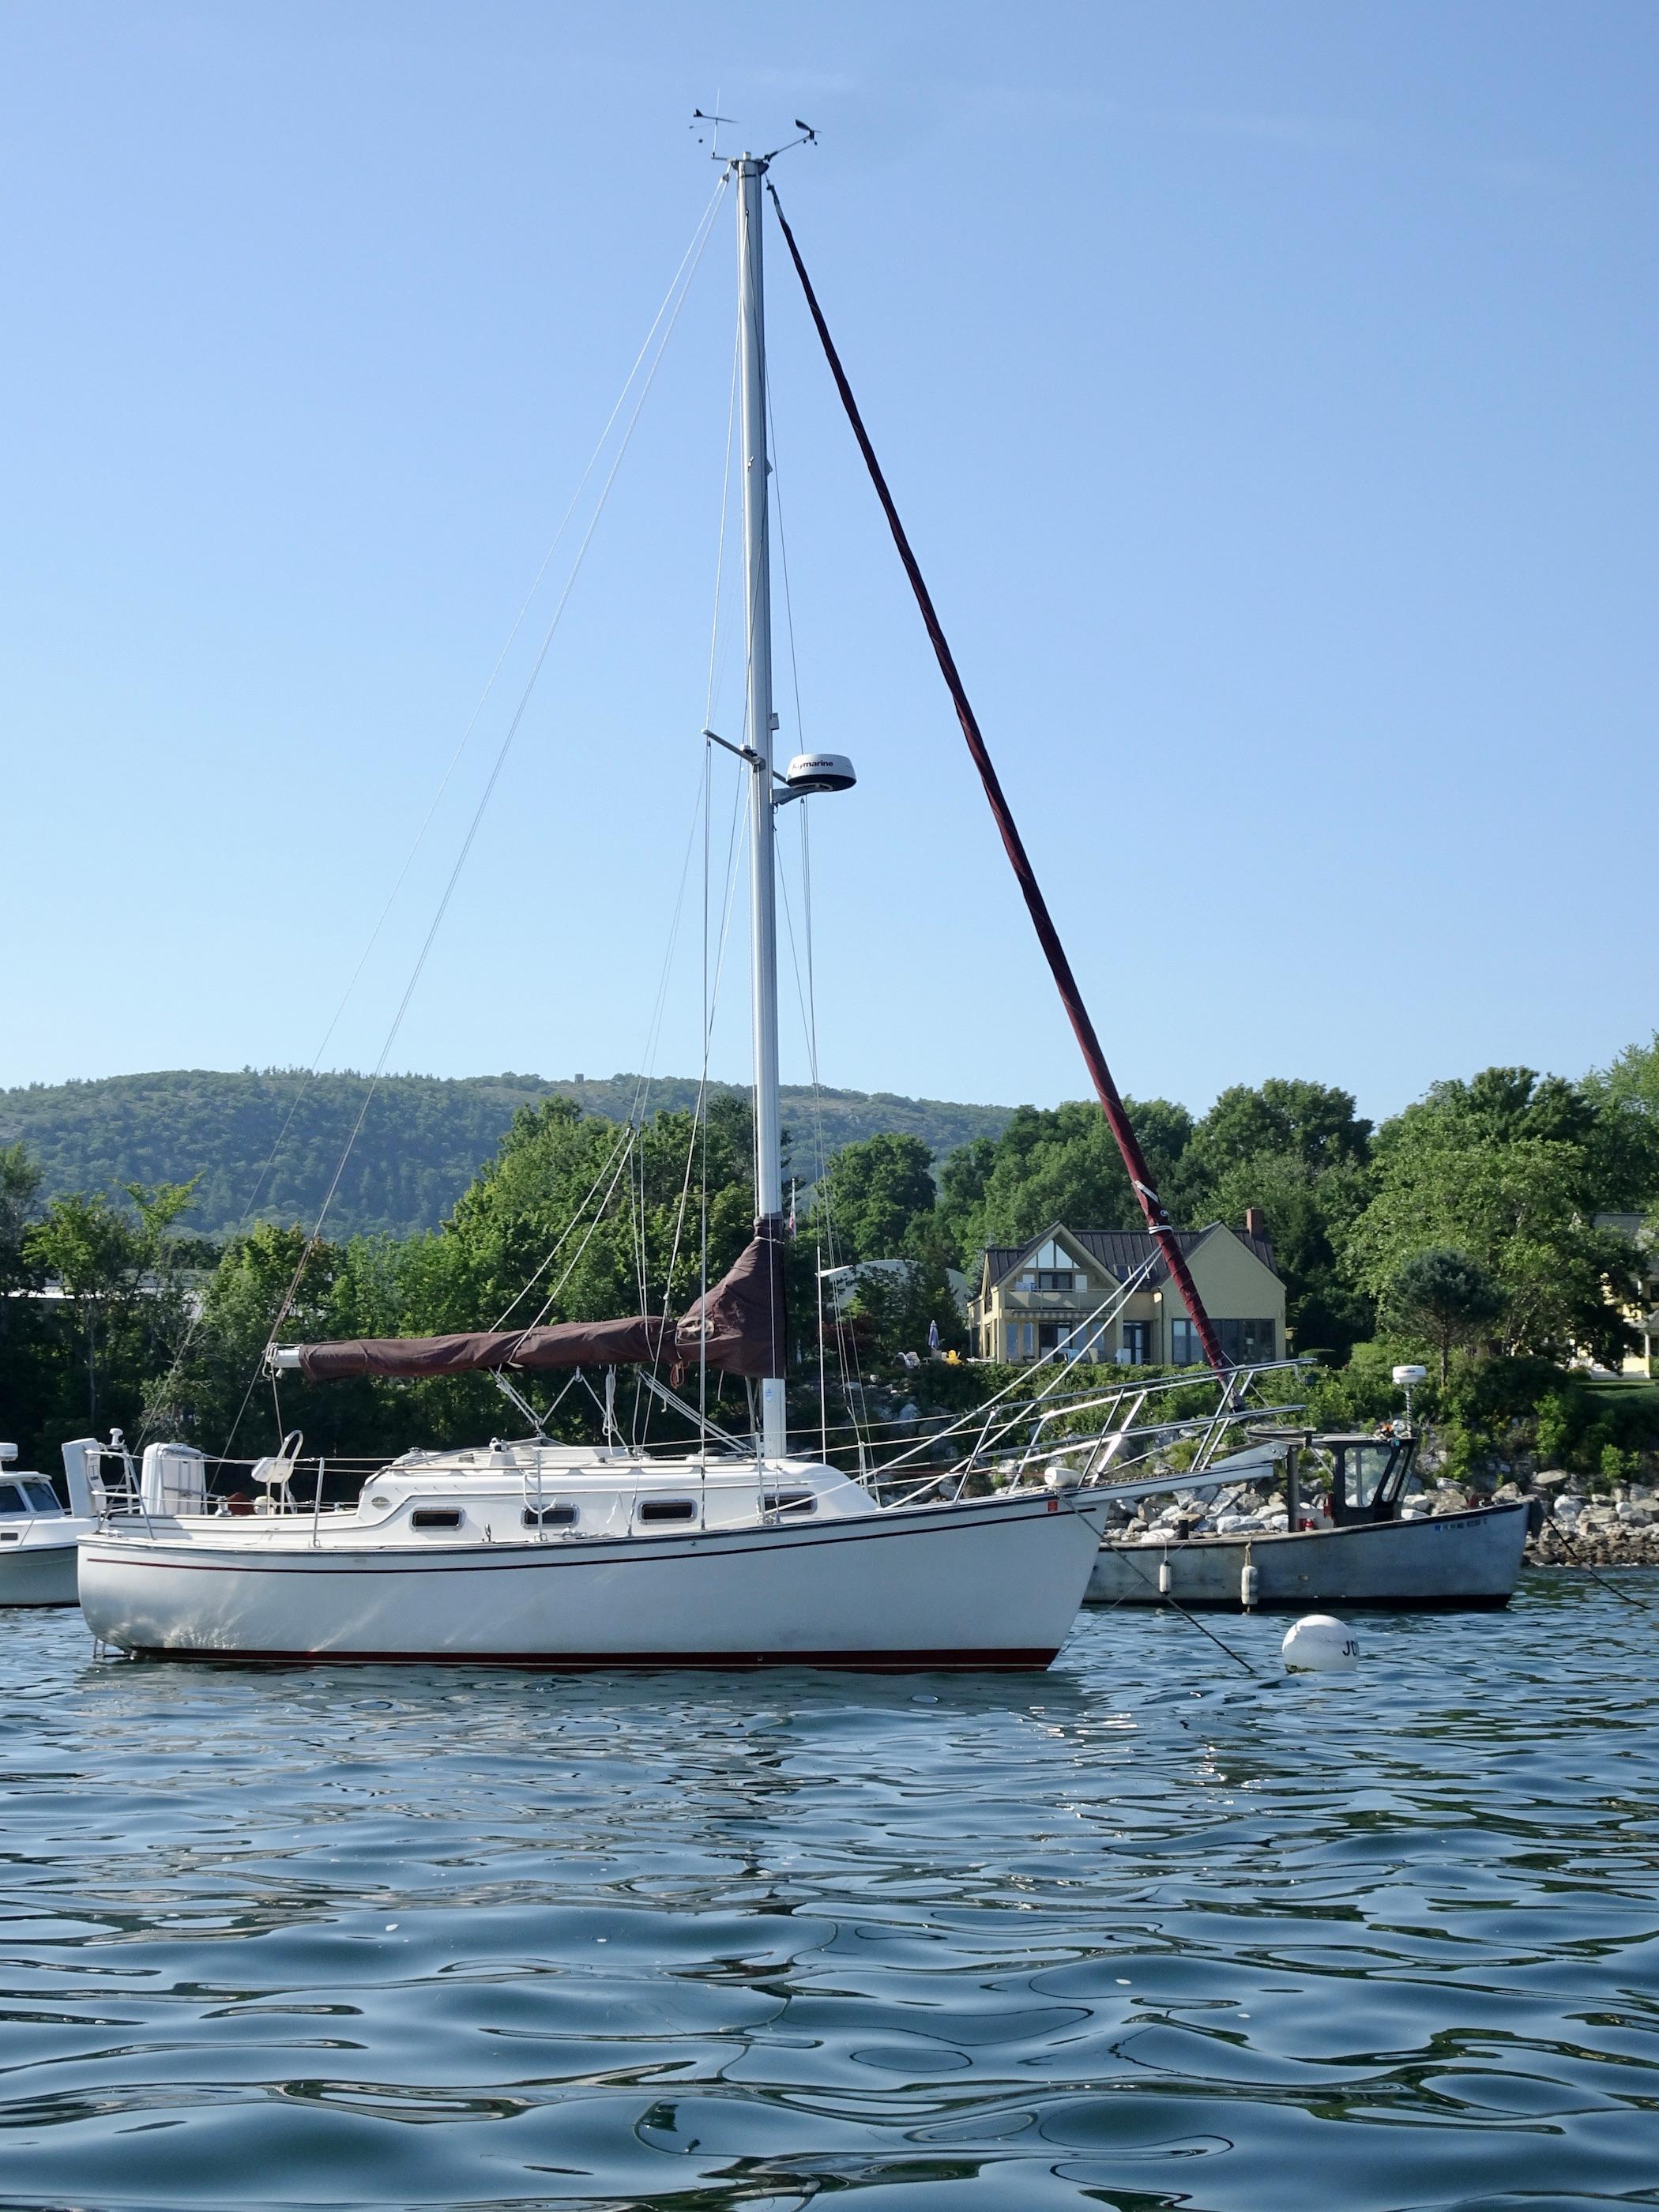 Island Packet 27 - Andora - On Mooring - Owners Photo